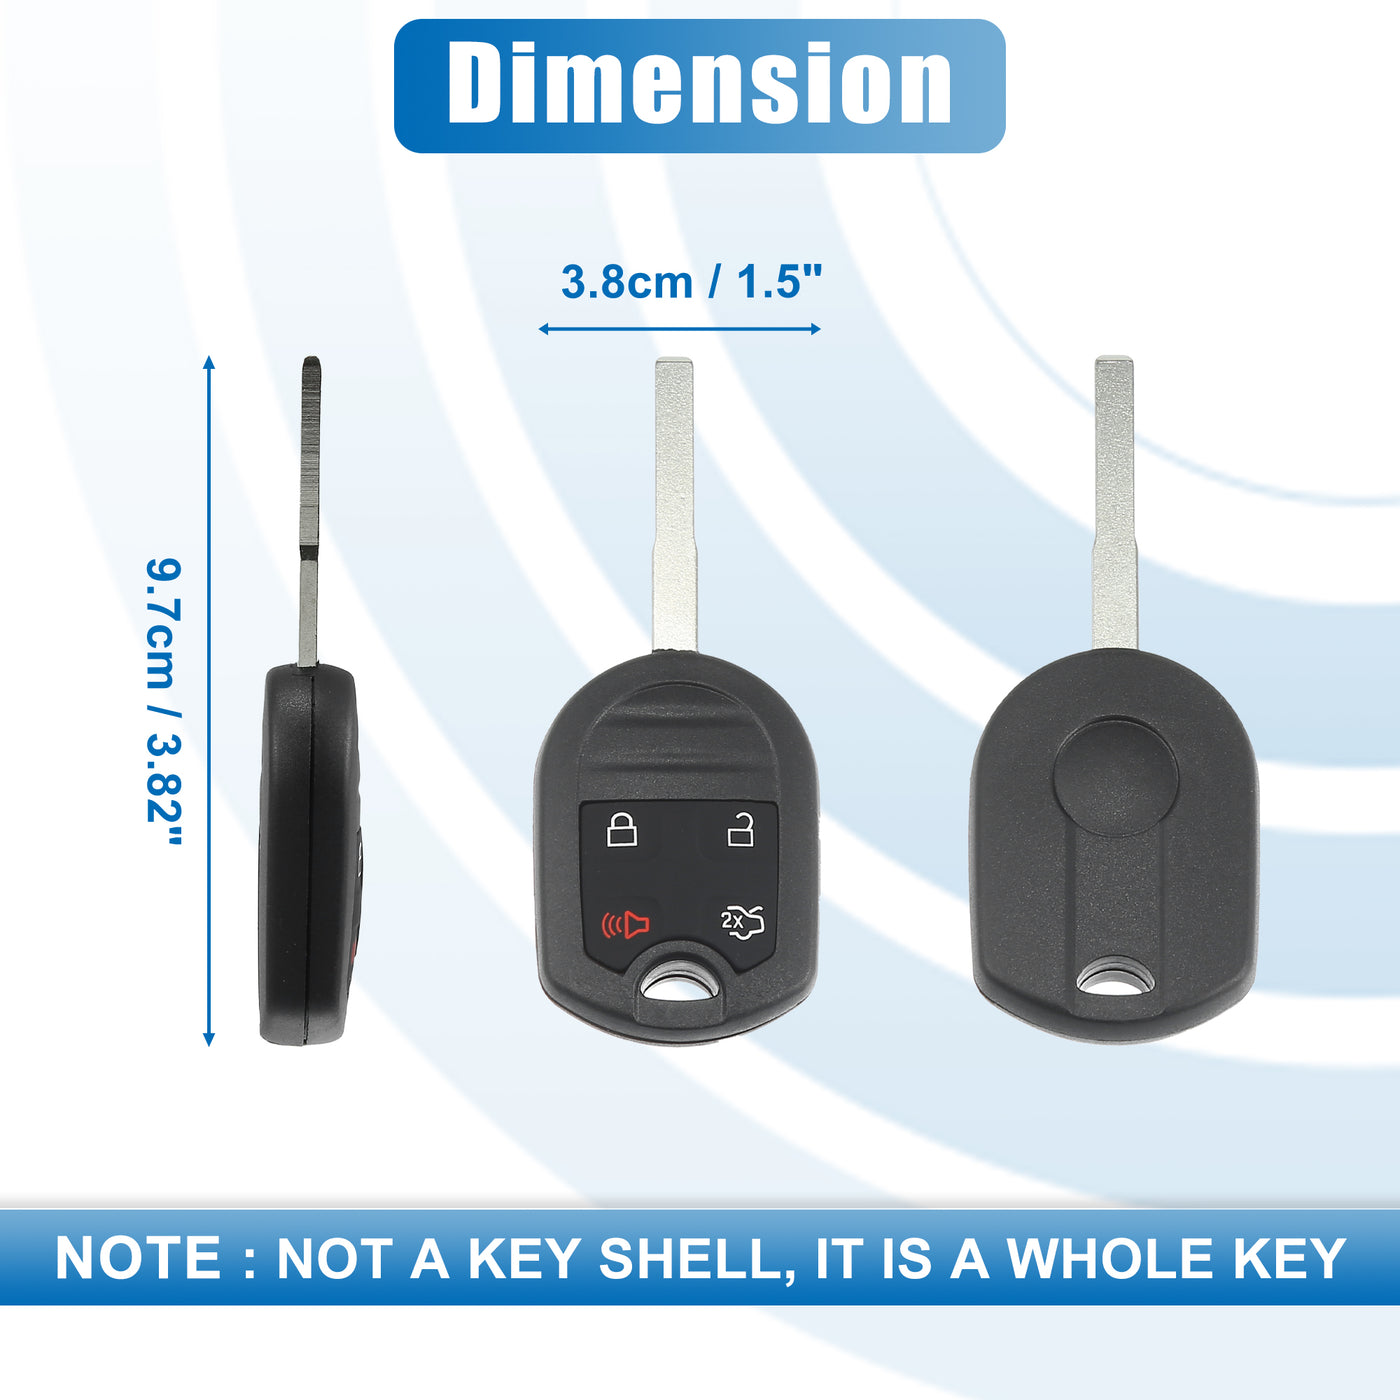 X AUTOHAUX 4 Button Car Keyless Entry Remote Control Replacement Key Fob Proximity Smart Fob CWTWB1U793 for Ford Fiesta 2015-2019 315MHz Chip 63 80